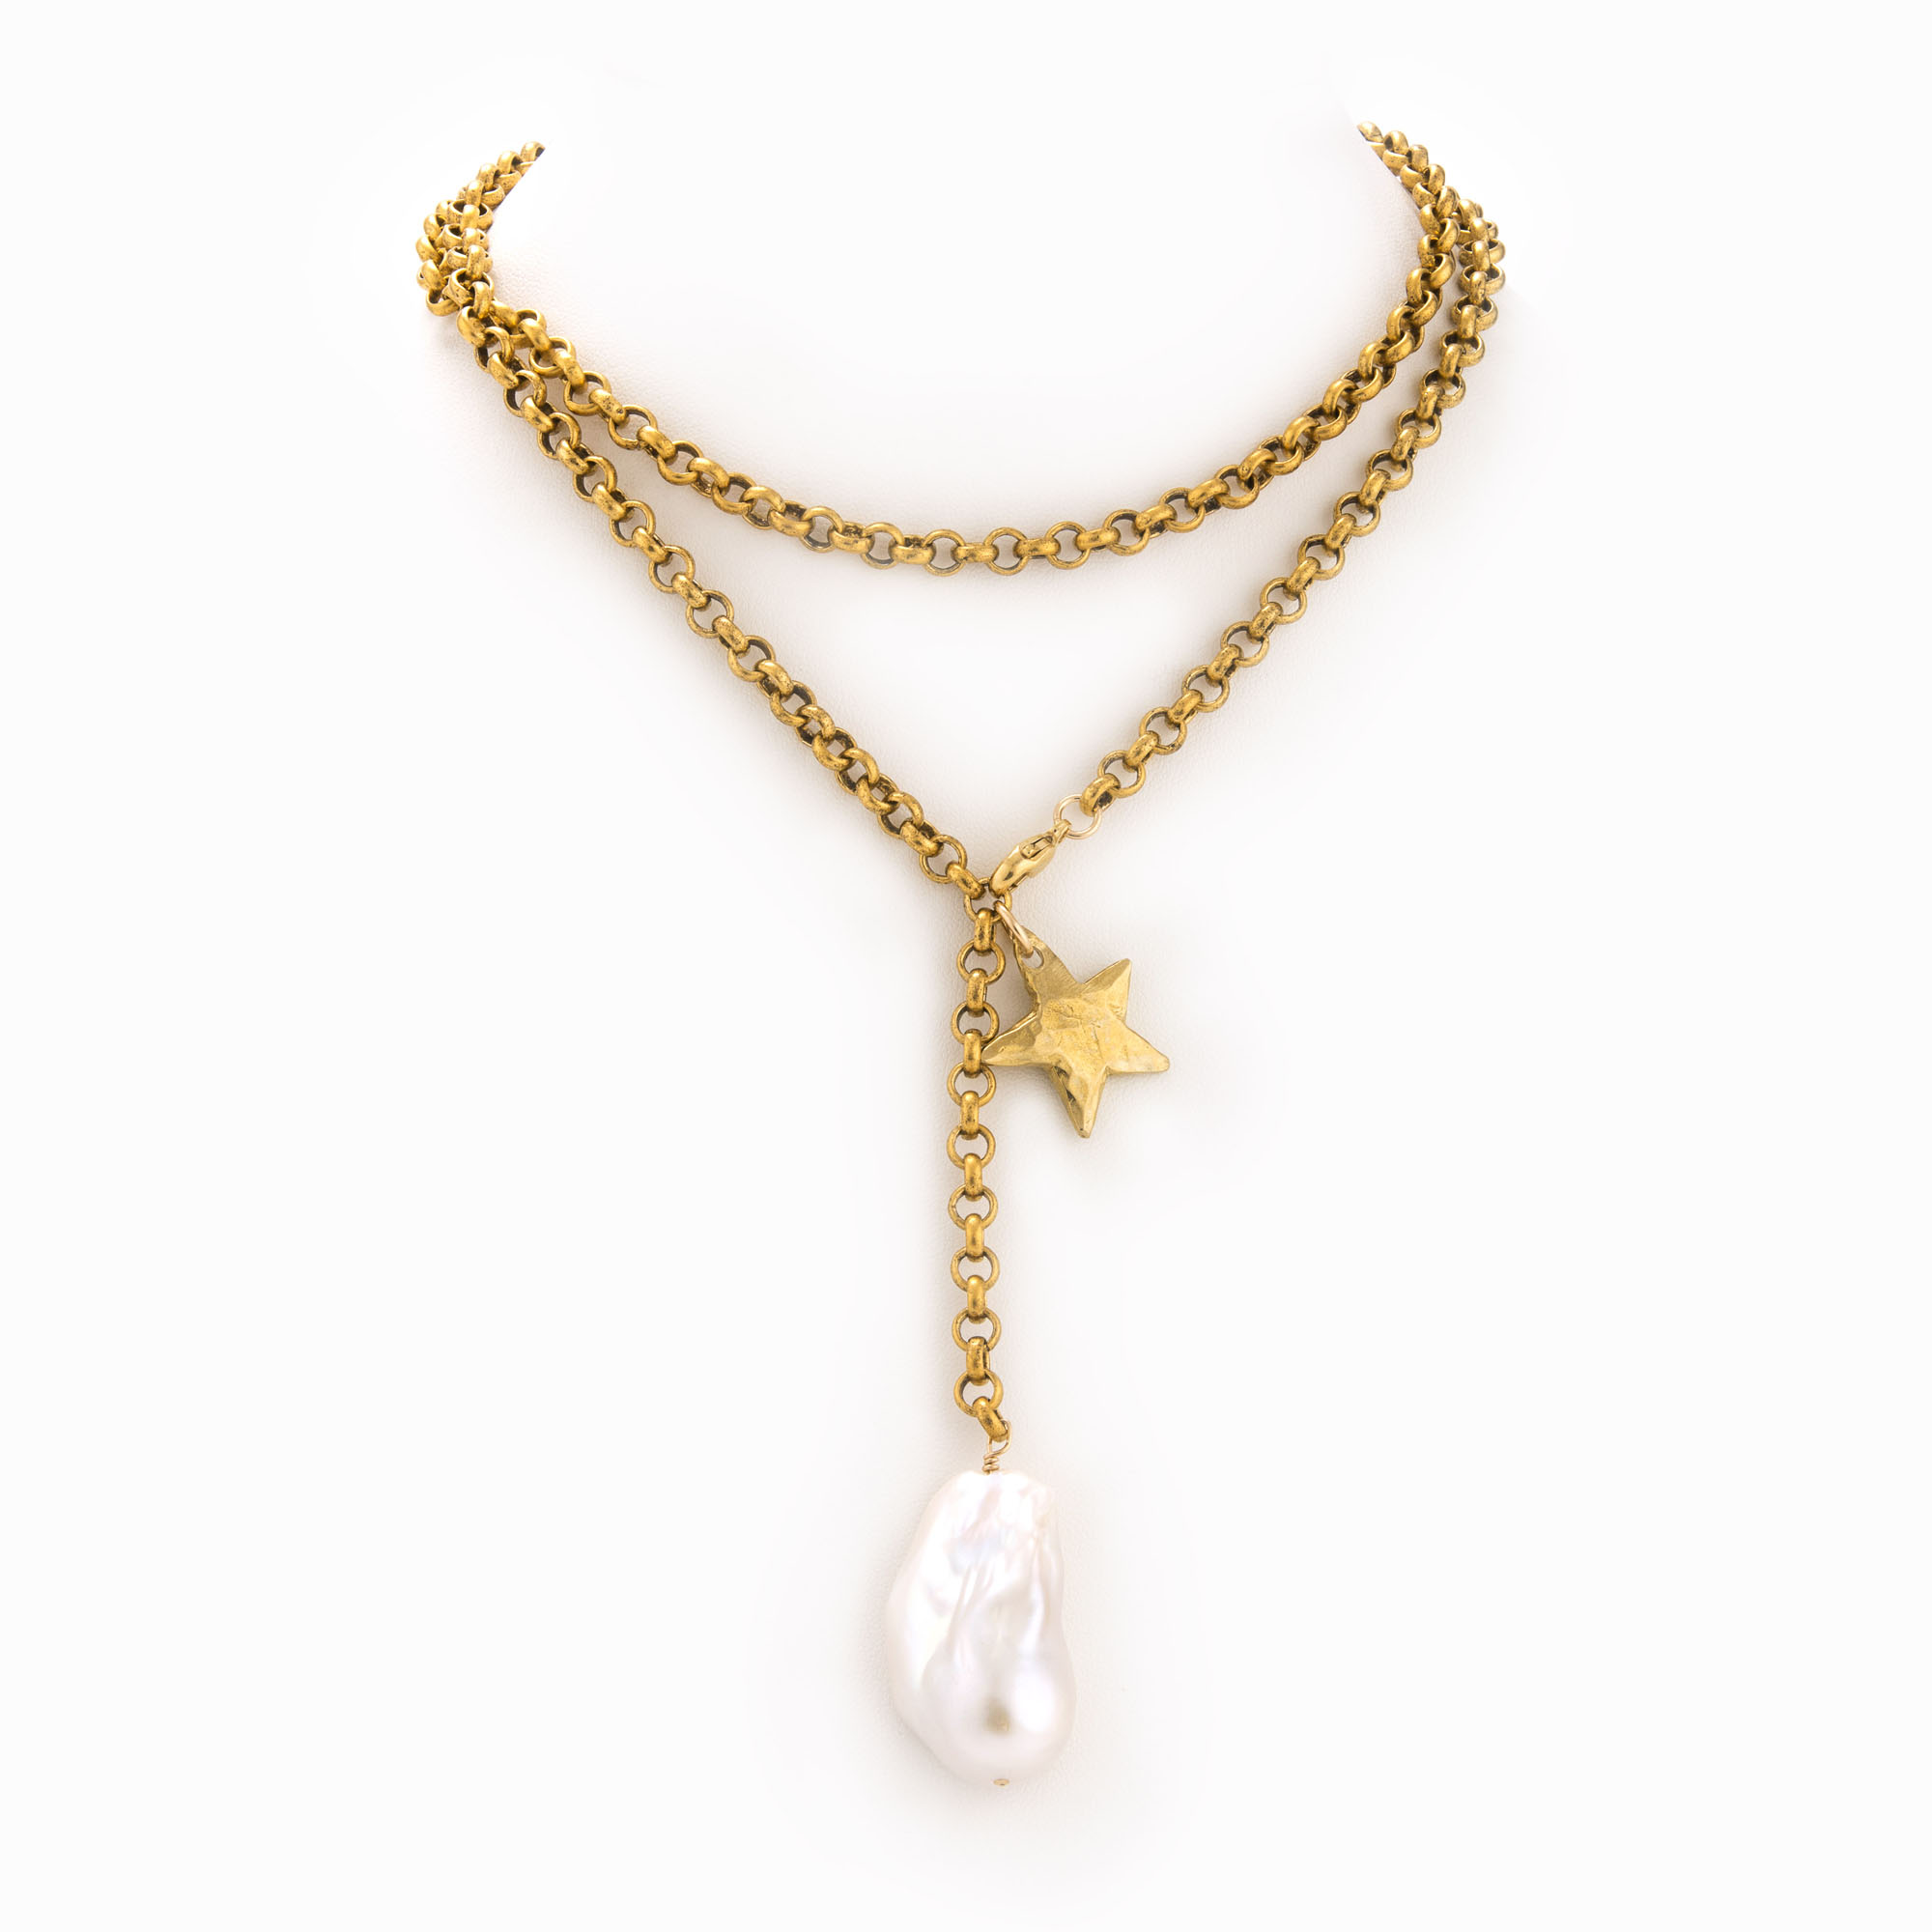 Featured image for “Ellen Brass Necklace”